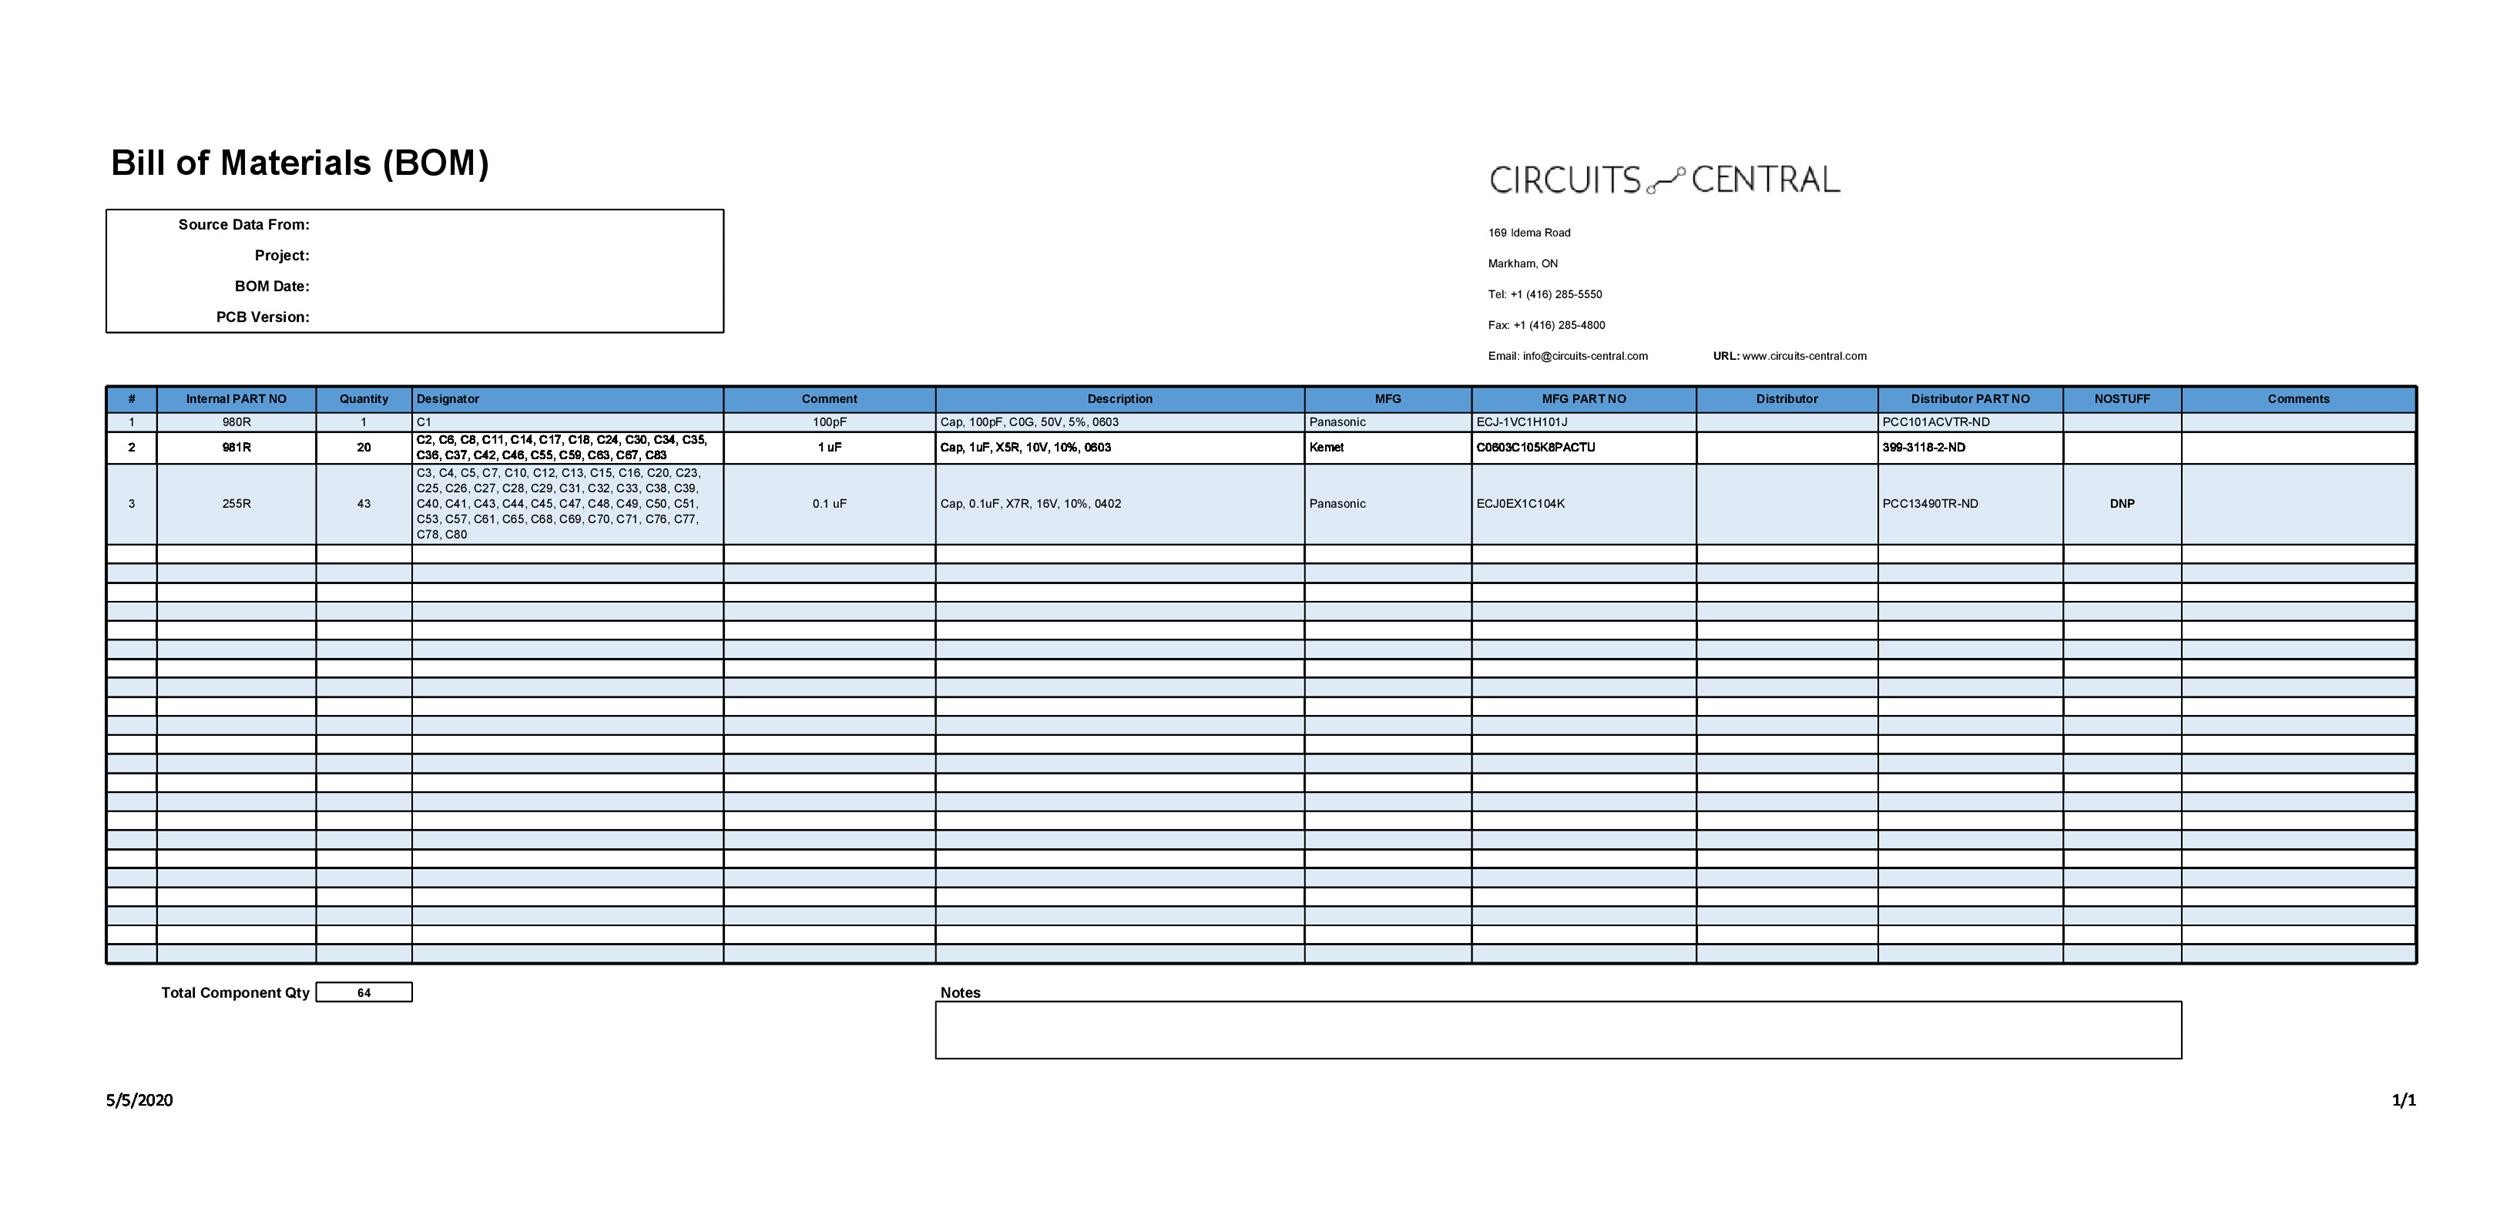 48 FREE Bill Of Material Templates (Excel Word) ᐅ TemplateLab